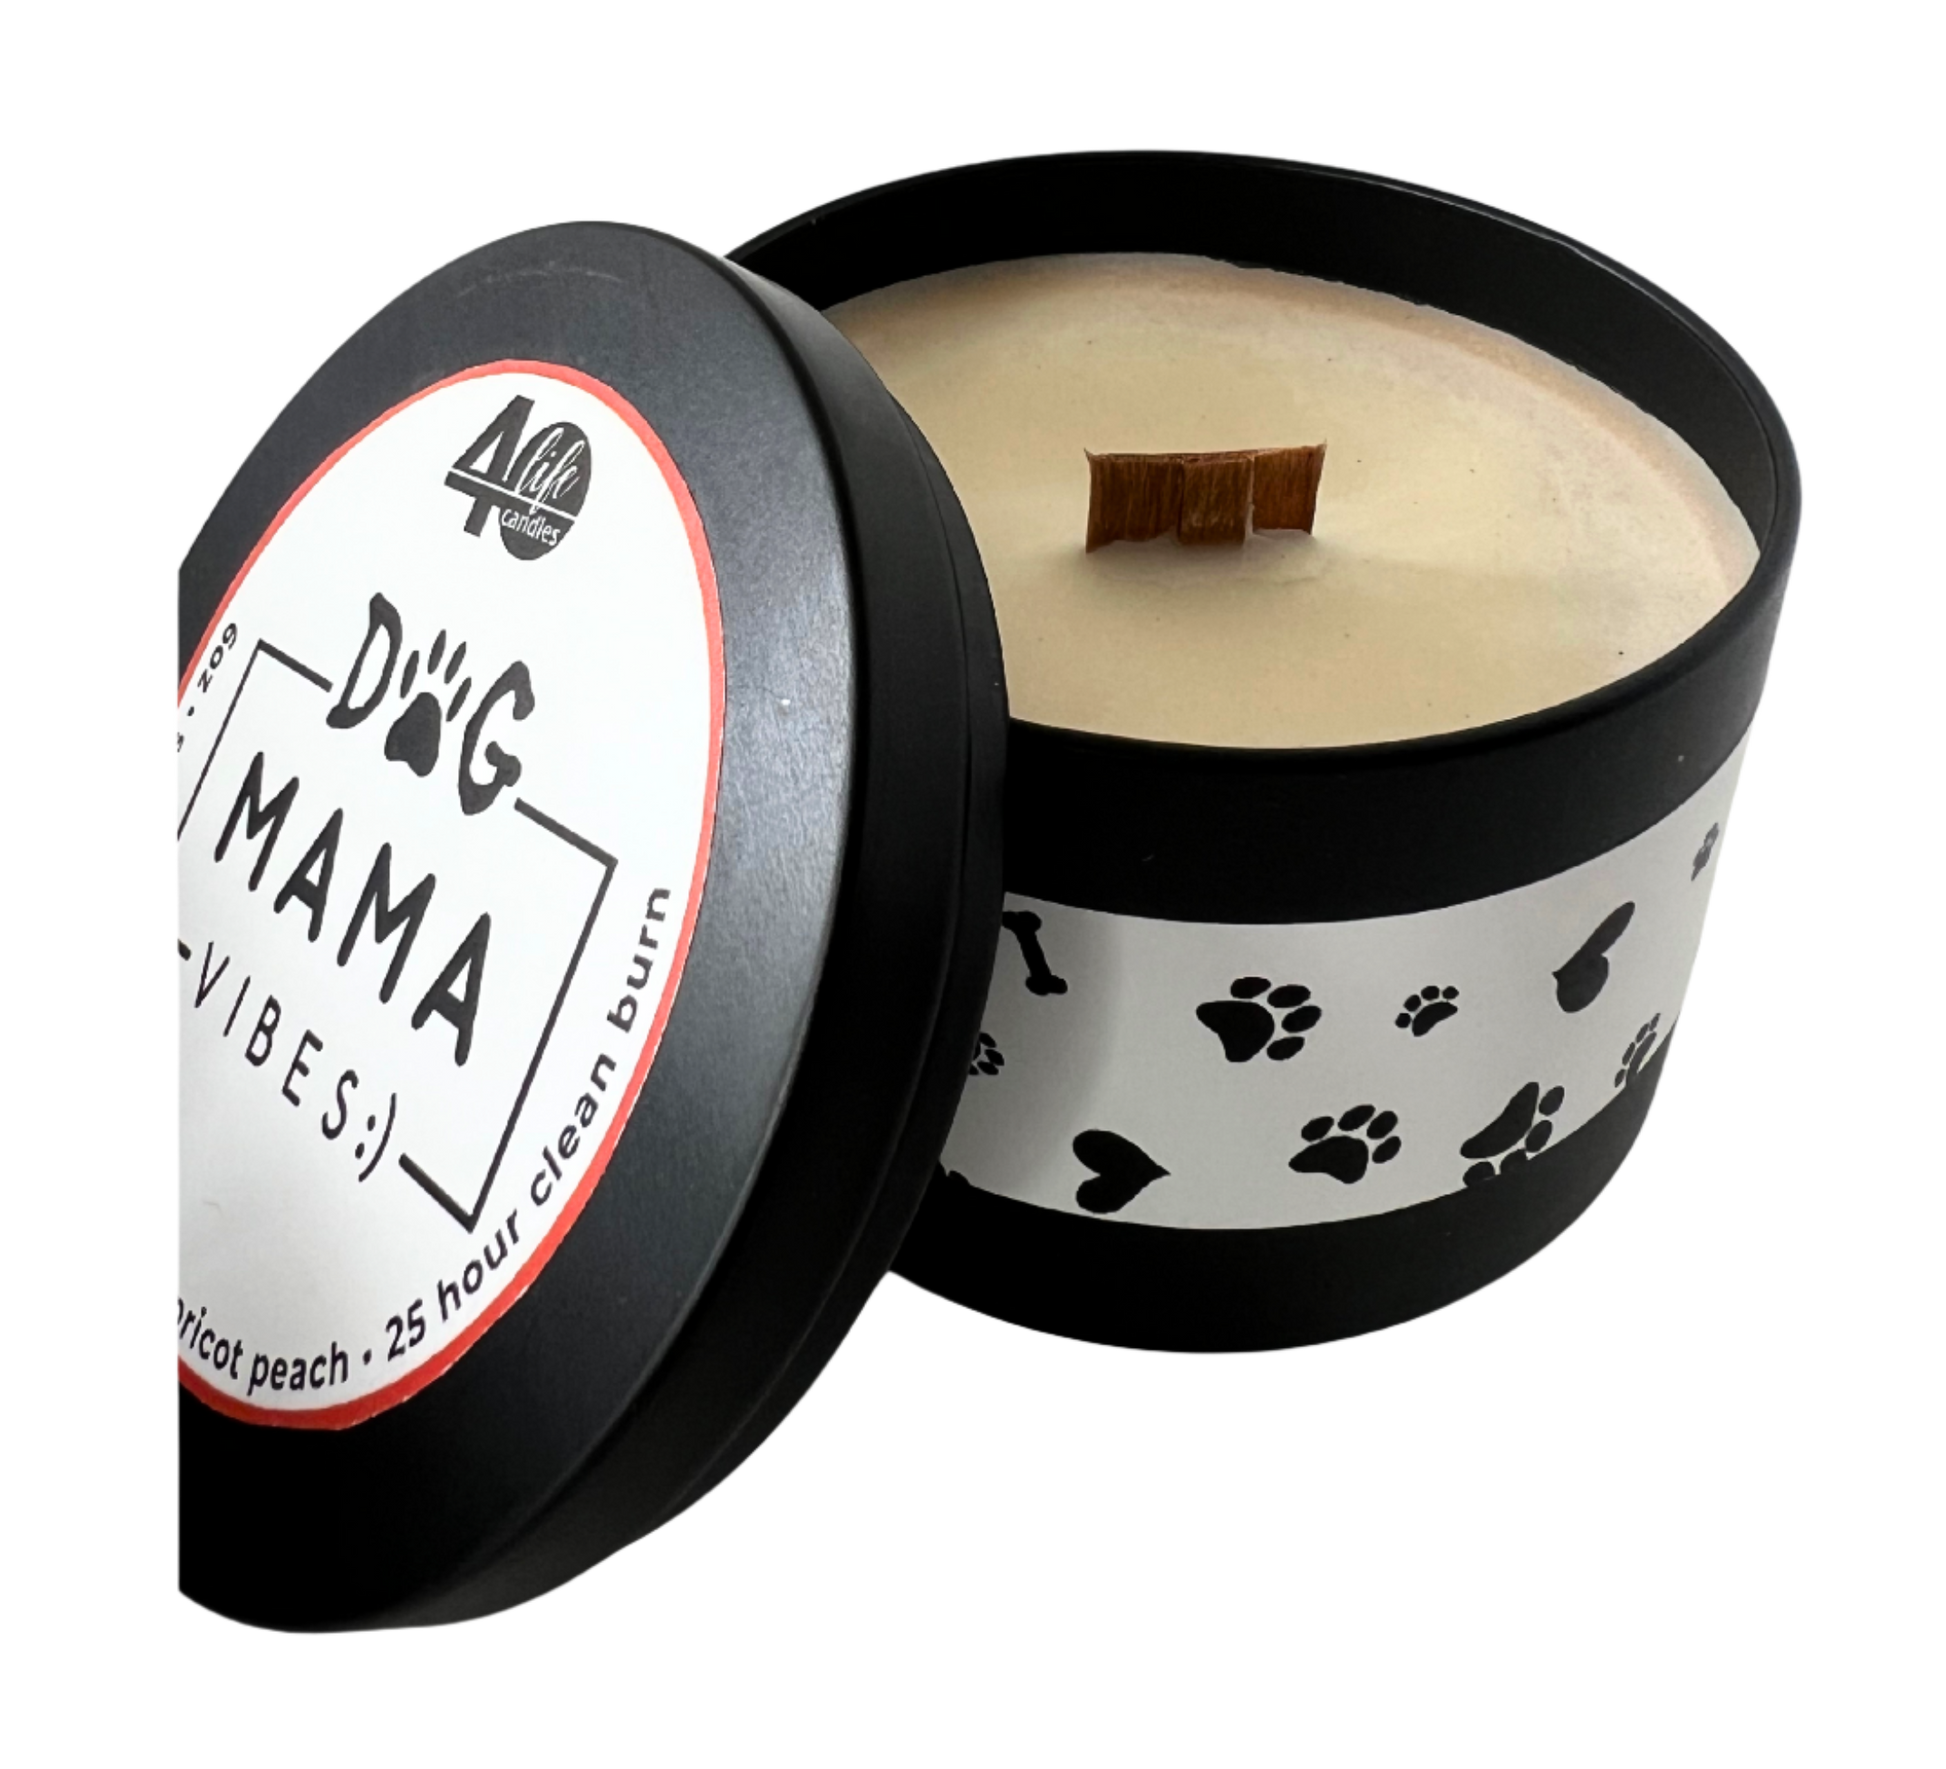 Dog Mama Vibes soy candle with crackling wood wick